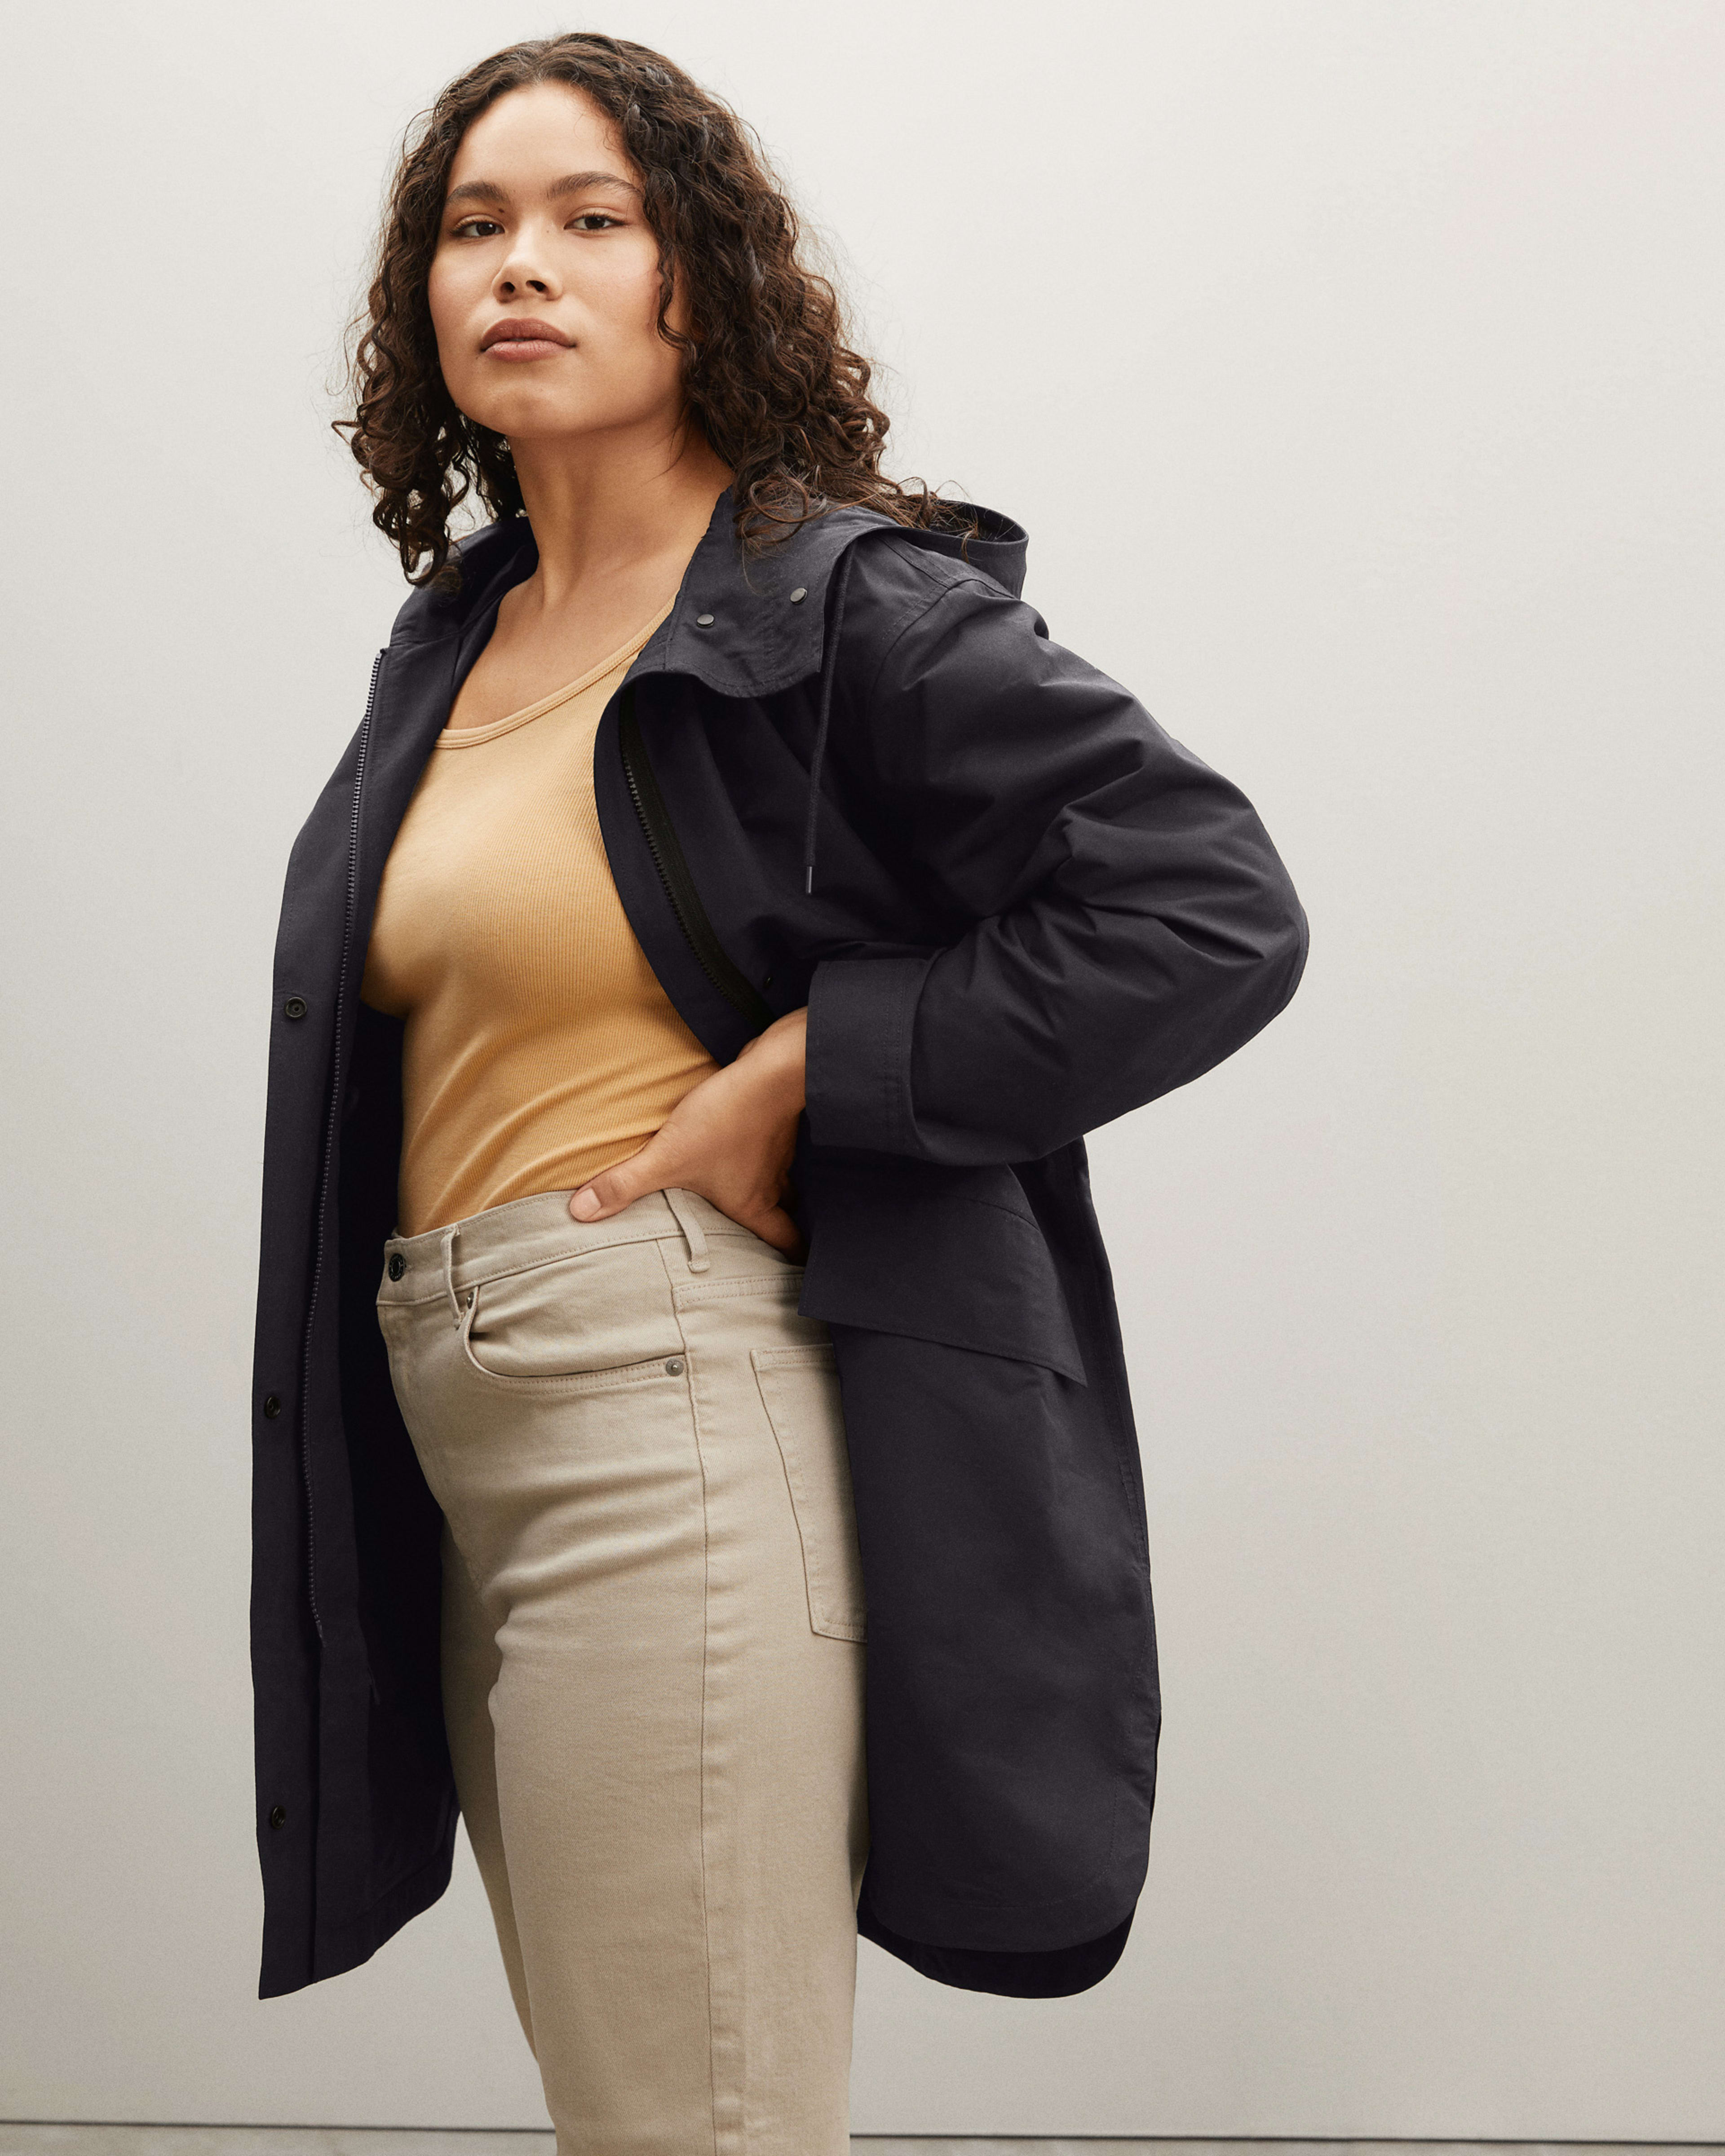 Everlane ReNew Anorak Review : StyleWise - Sustainable Fashion